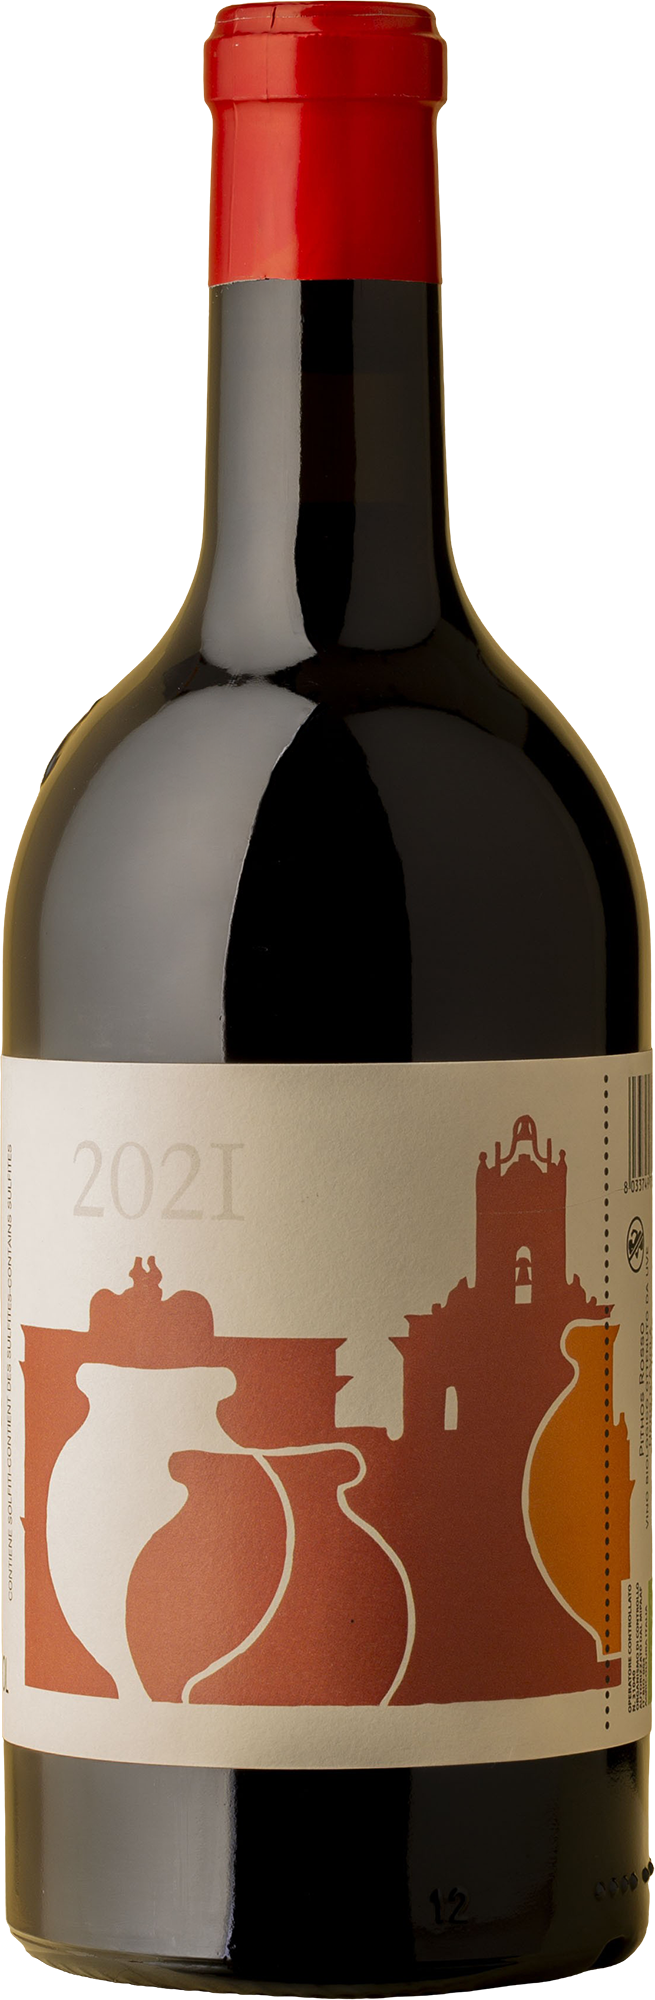 COS - Pithos Rosso Red Blend 2021